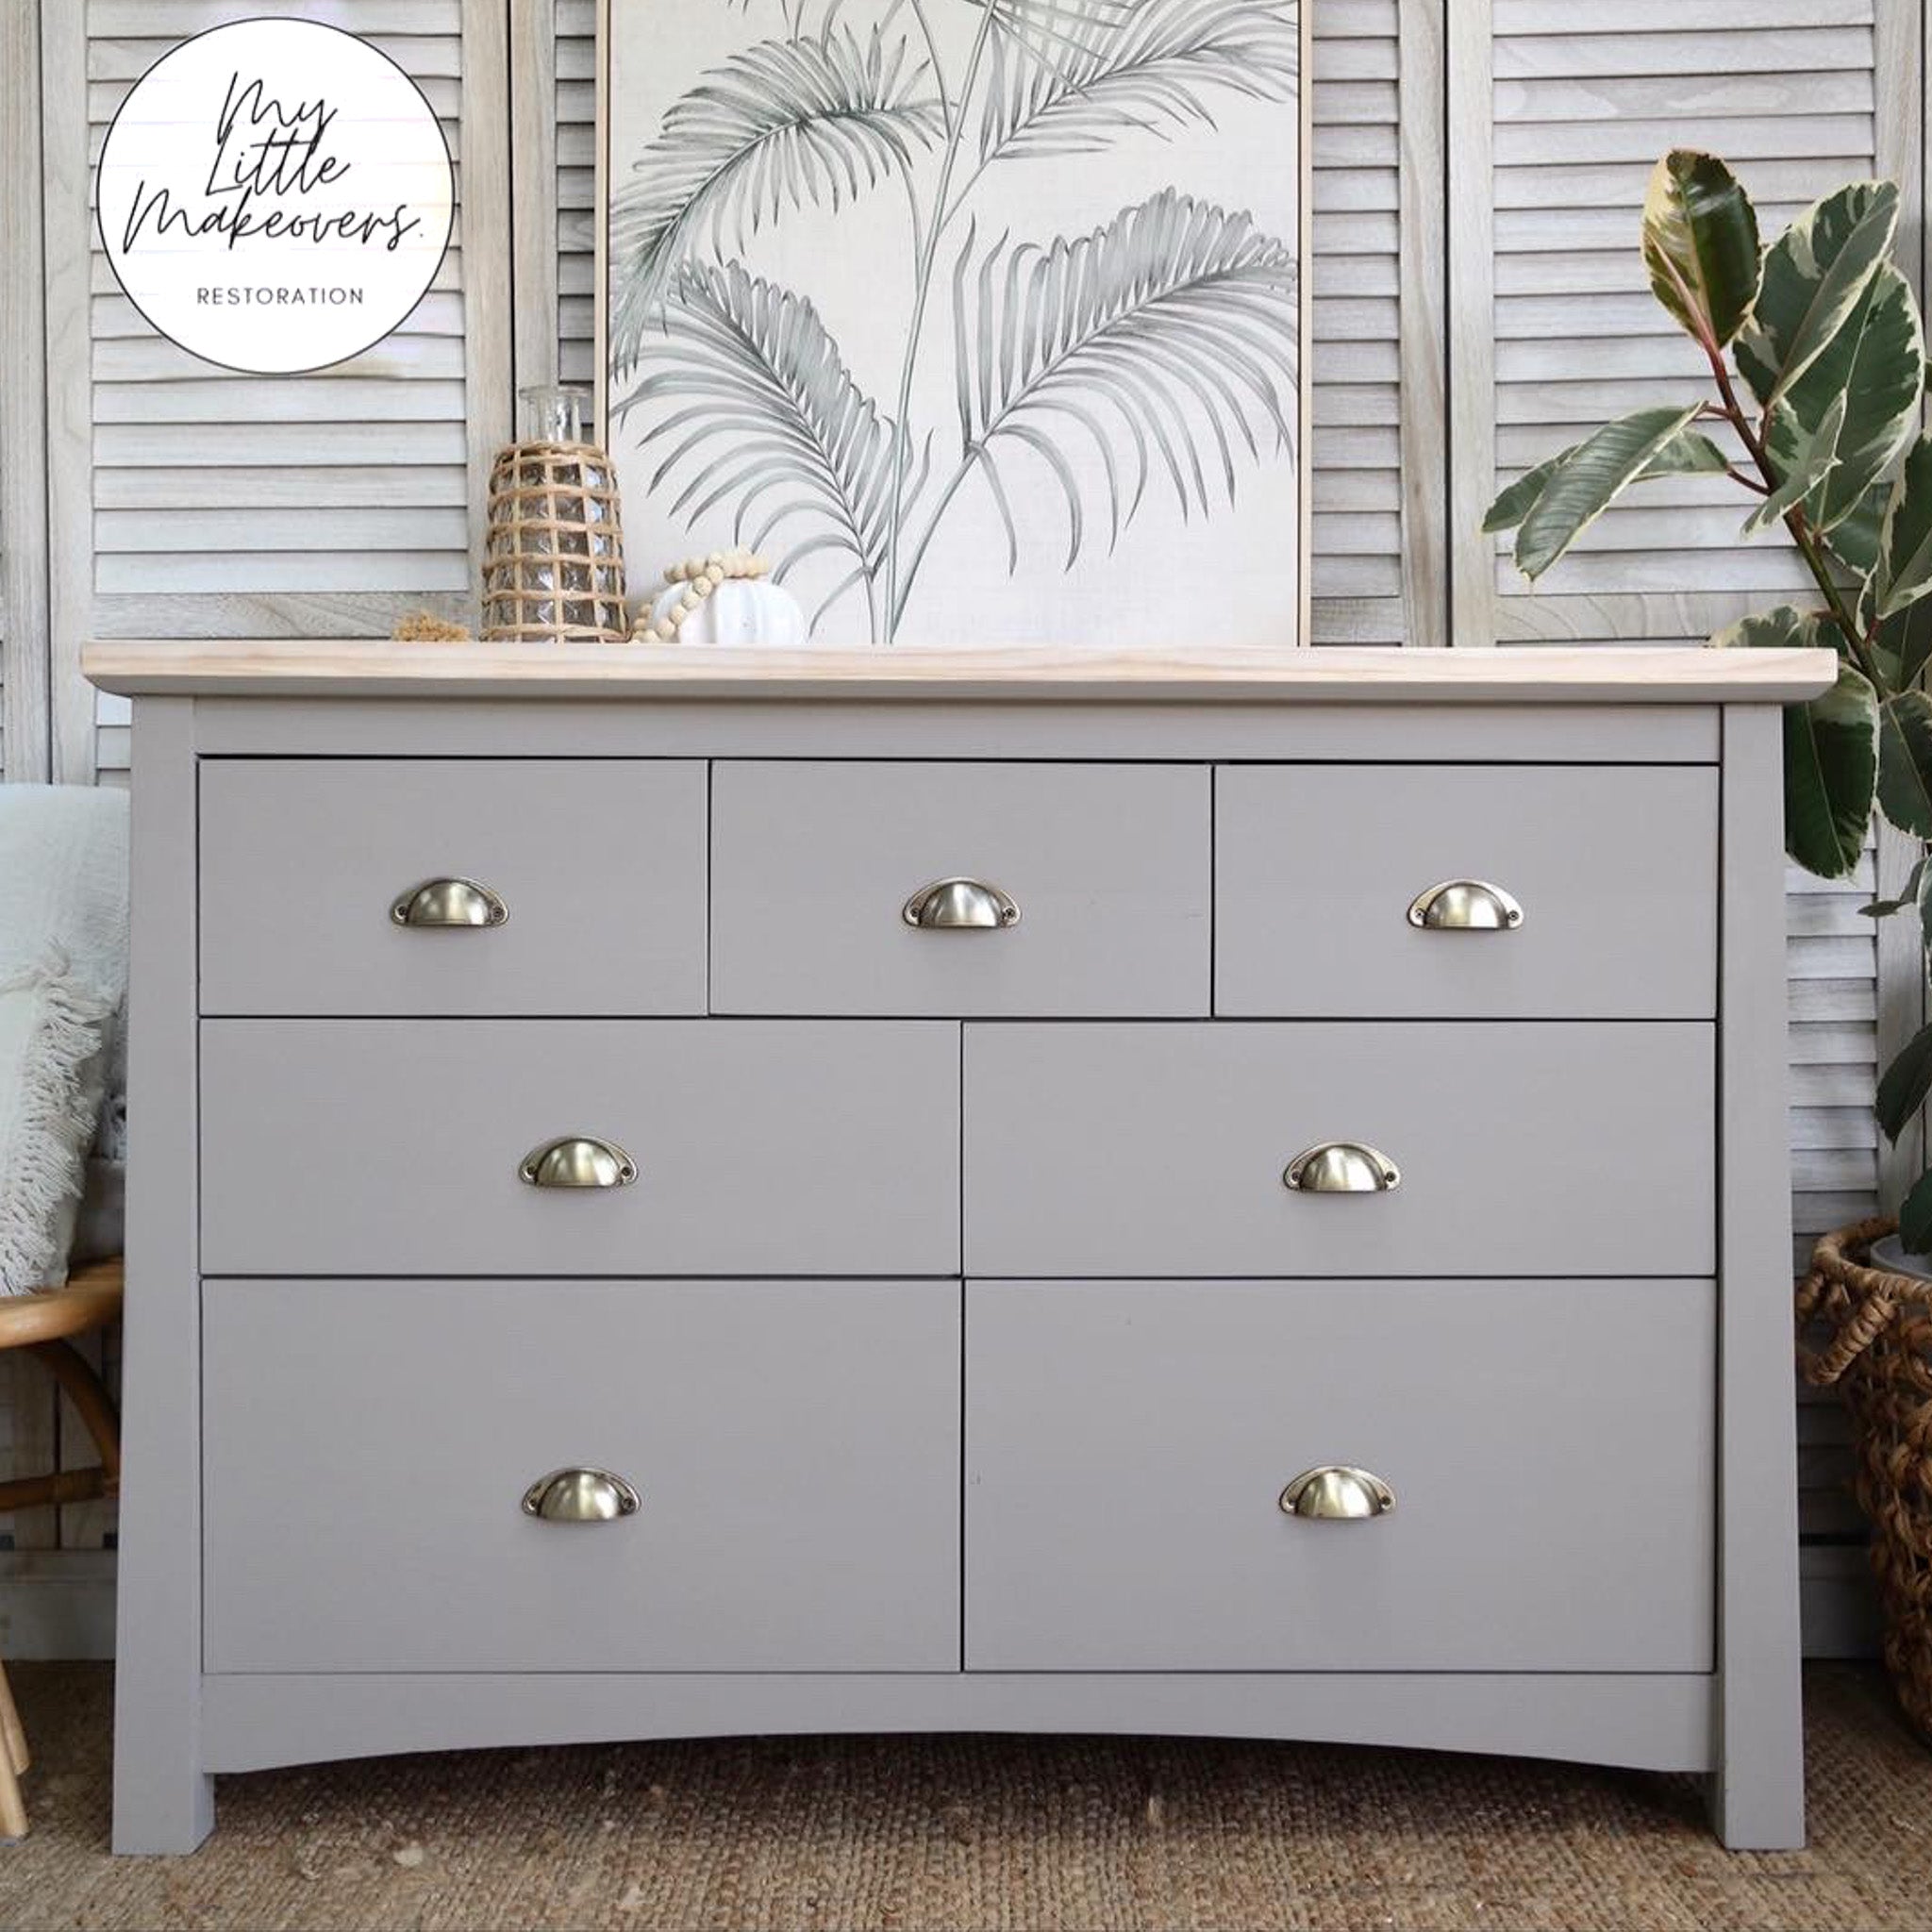 A 7-drawer dresser refurbished by My Little Makeovers Restoration is painted in Dixie Belle's French Linen chalk mineral paint.